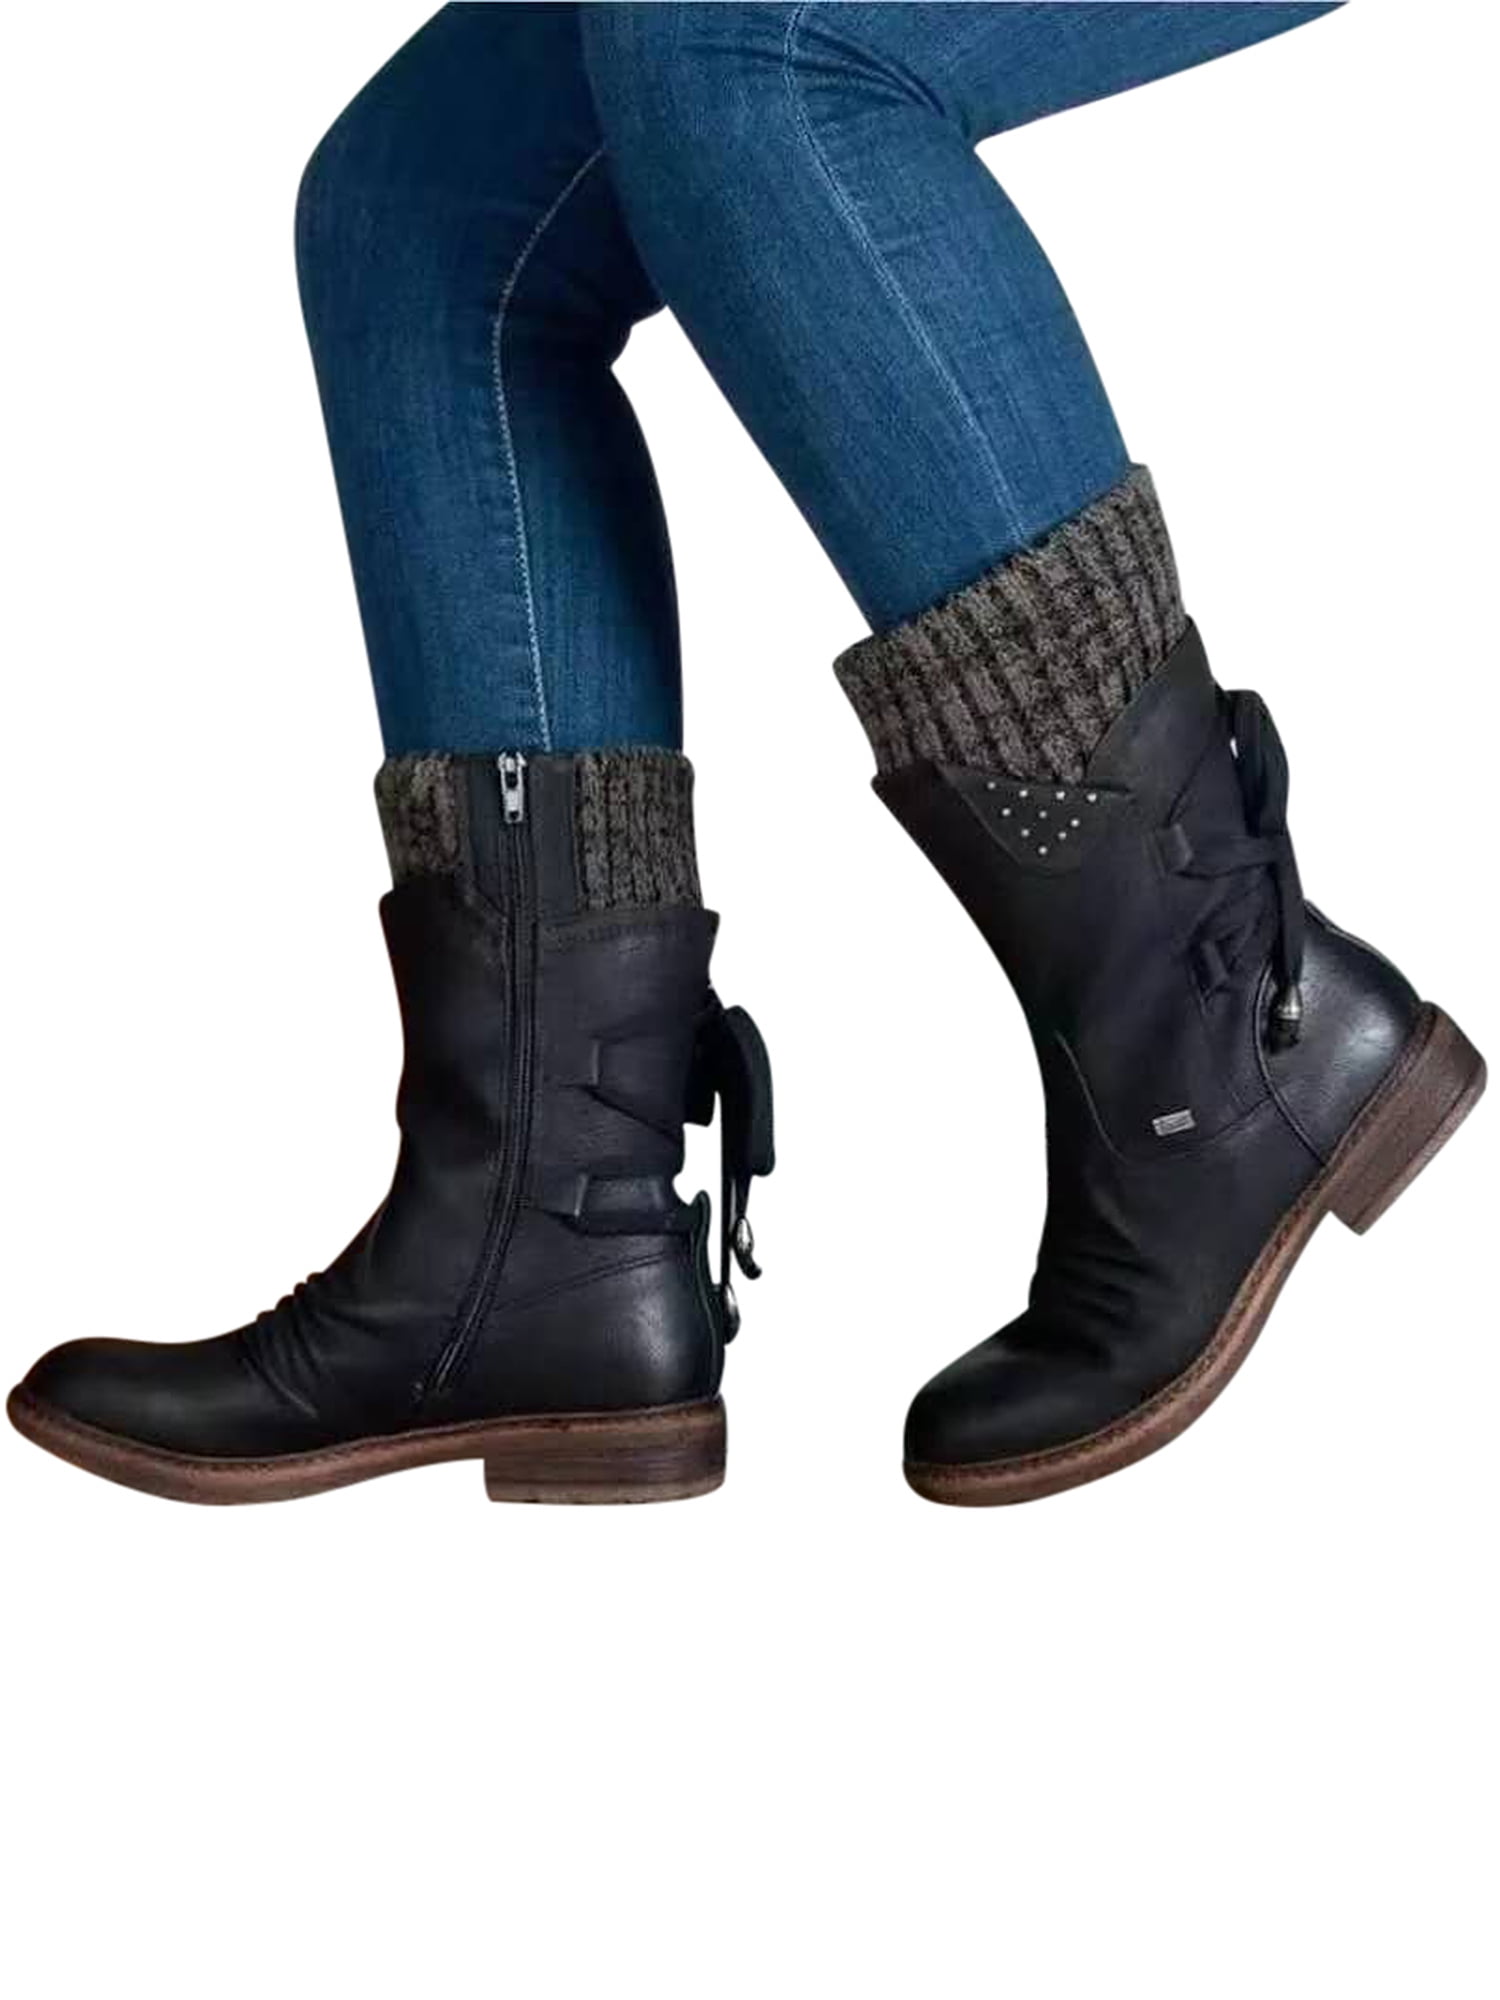 Details about   Boots Jodhpur Ladies Horse Riding Craft Leather